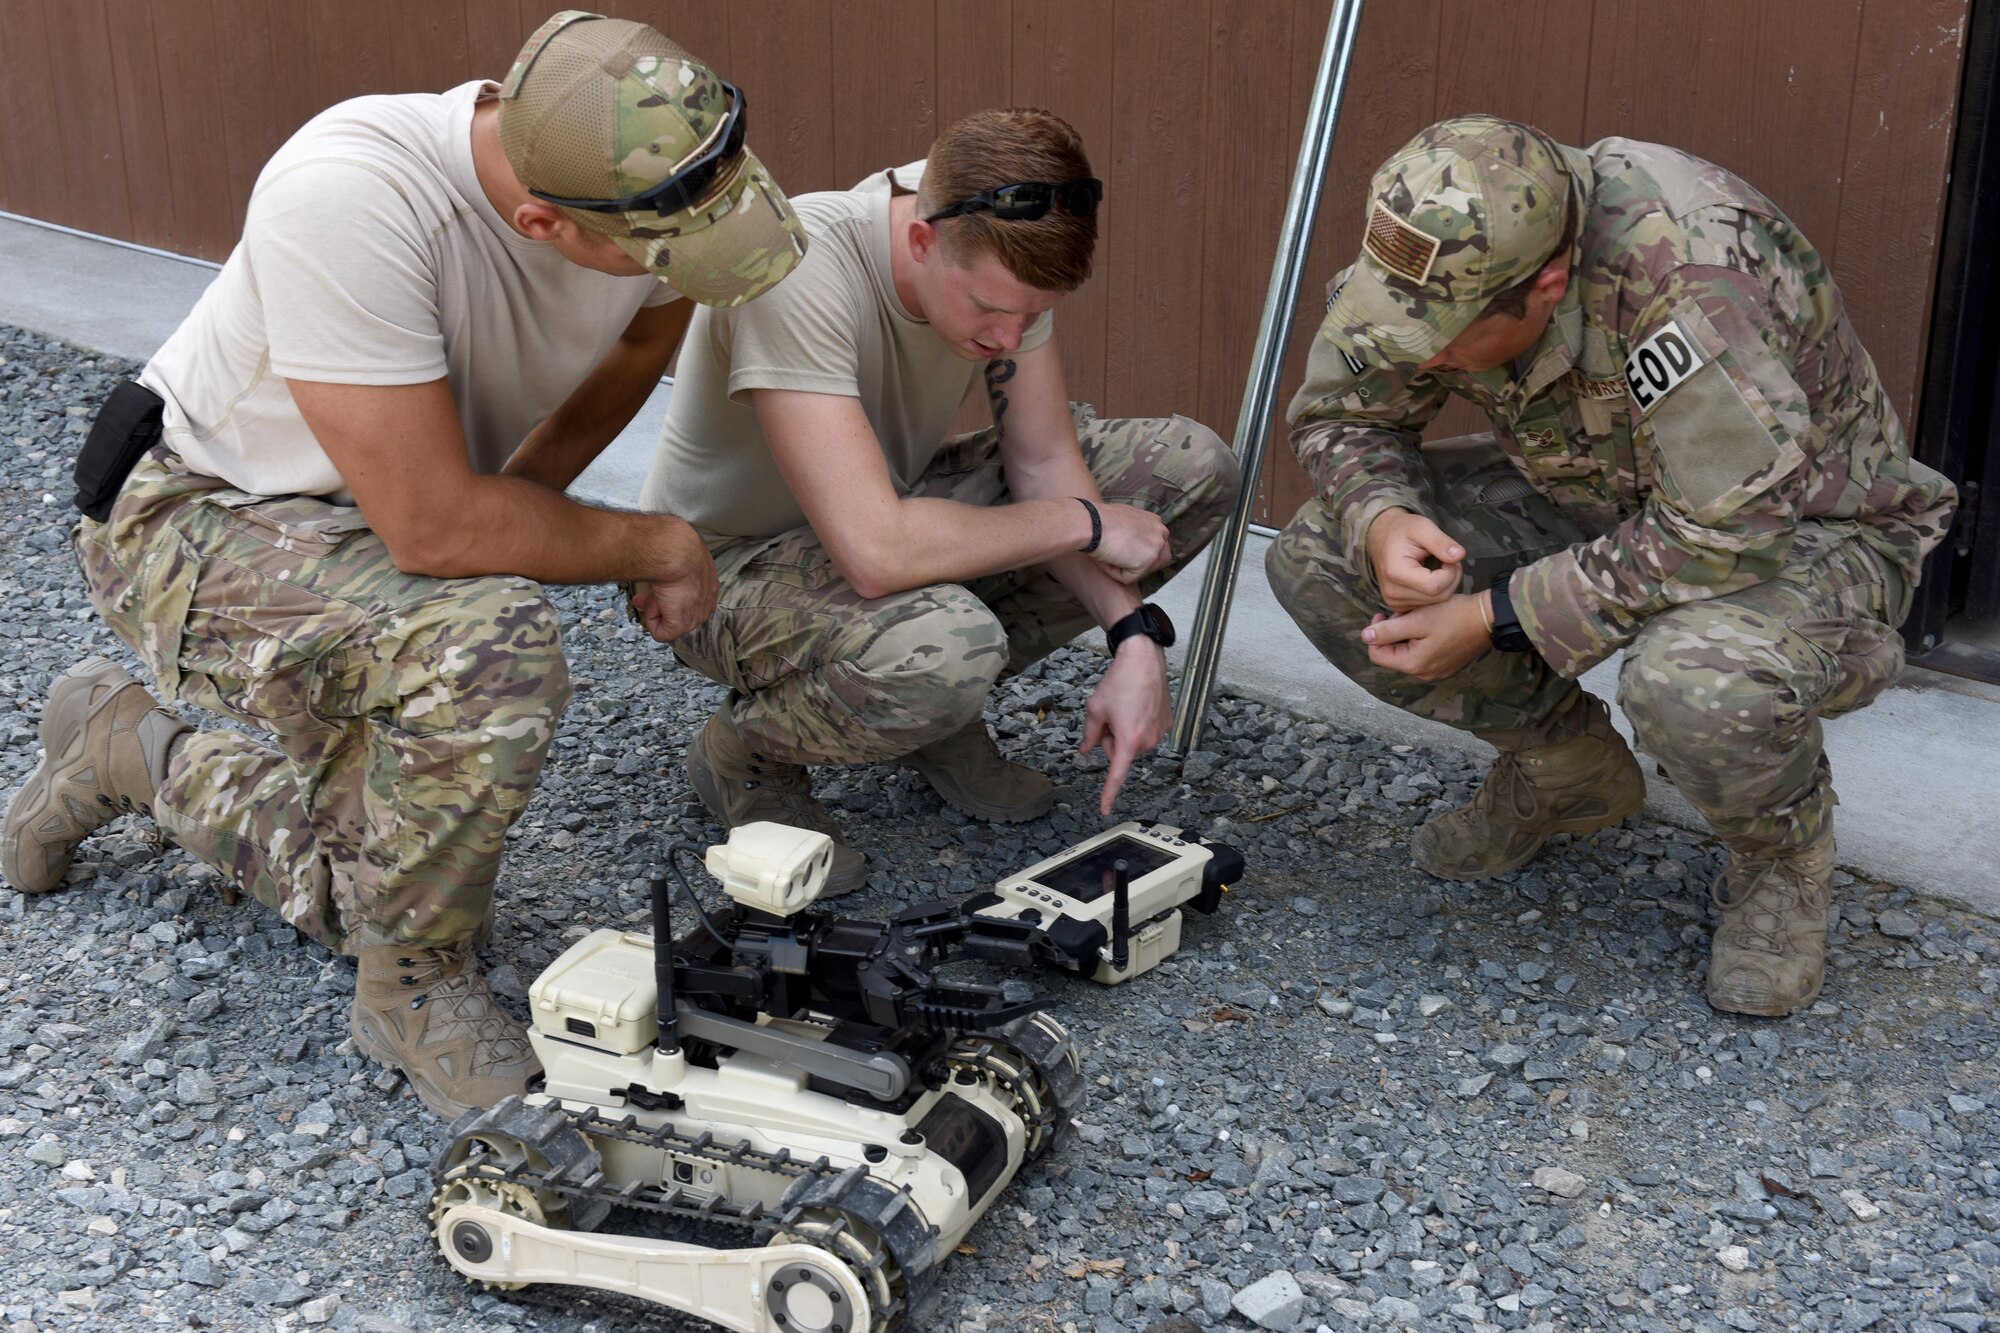 Explosive ordnance disposal Airmen from Joint Base Charleston, South Carolina, examine one of the three robots used in the EOD exercise, Sept. 14, 2016, at Seymour Johnson Air Force Base, North Carolina. The Airman were also accompanied by Marines from Camp Lejeune, North Carolina, during the exercise, and were able to participate in different EOD scenarios. (U.S. Air Force photo by Airman Miranda A. Loera)